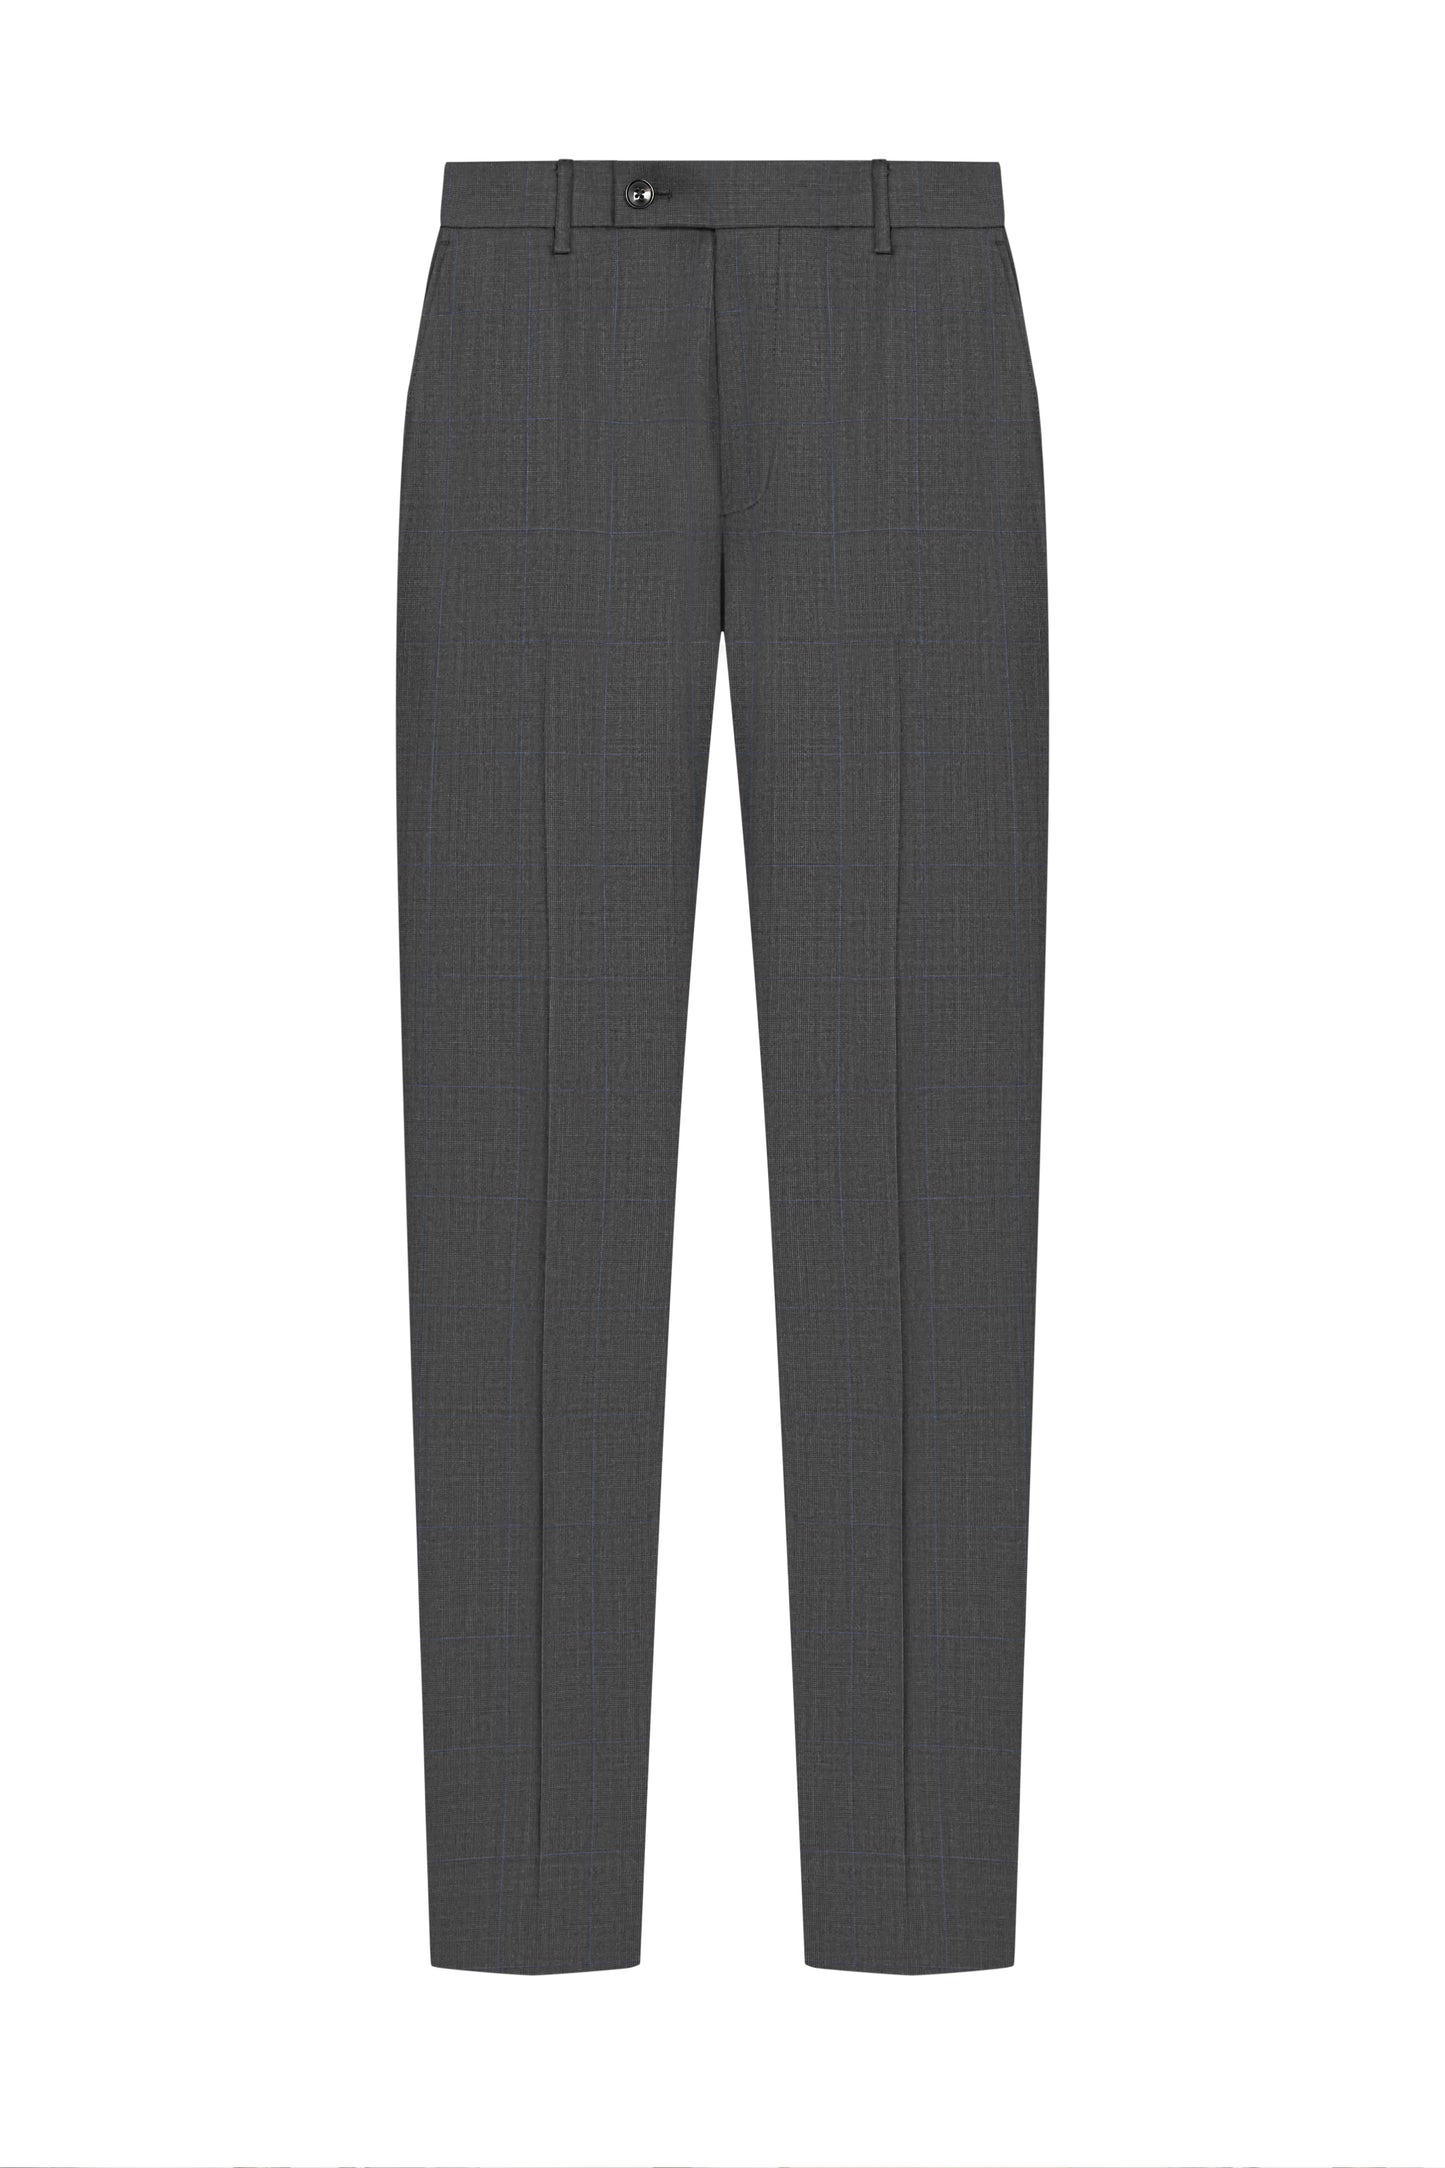 Mid Grey Prince of Wales Suit